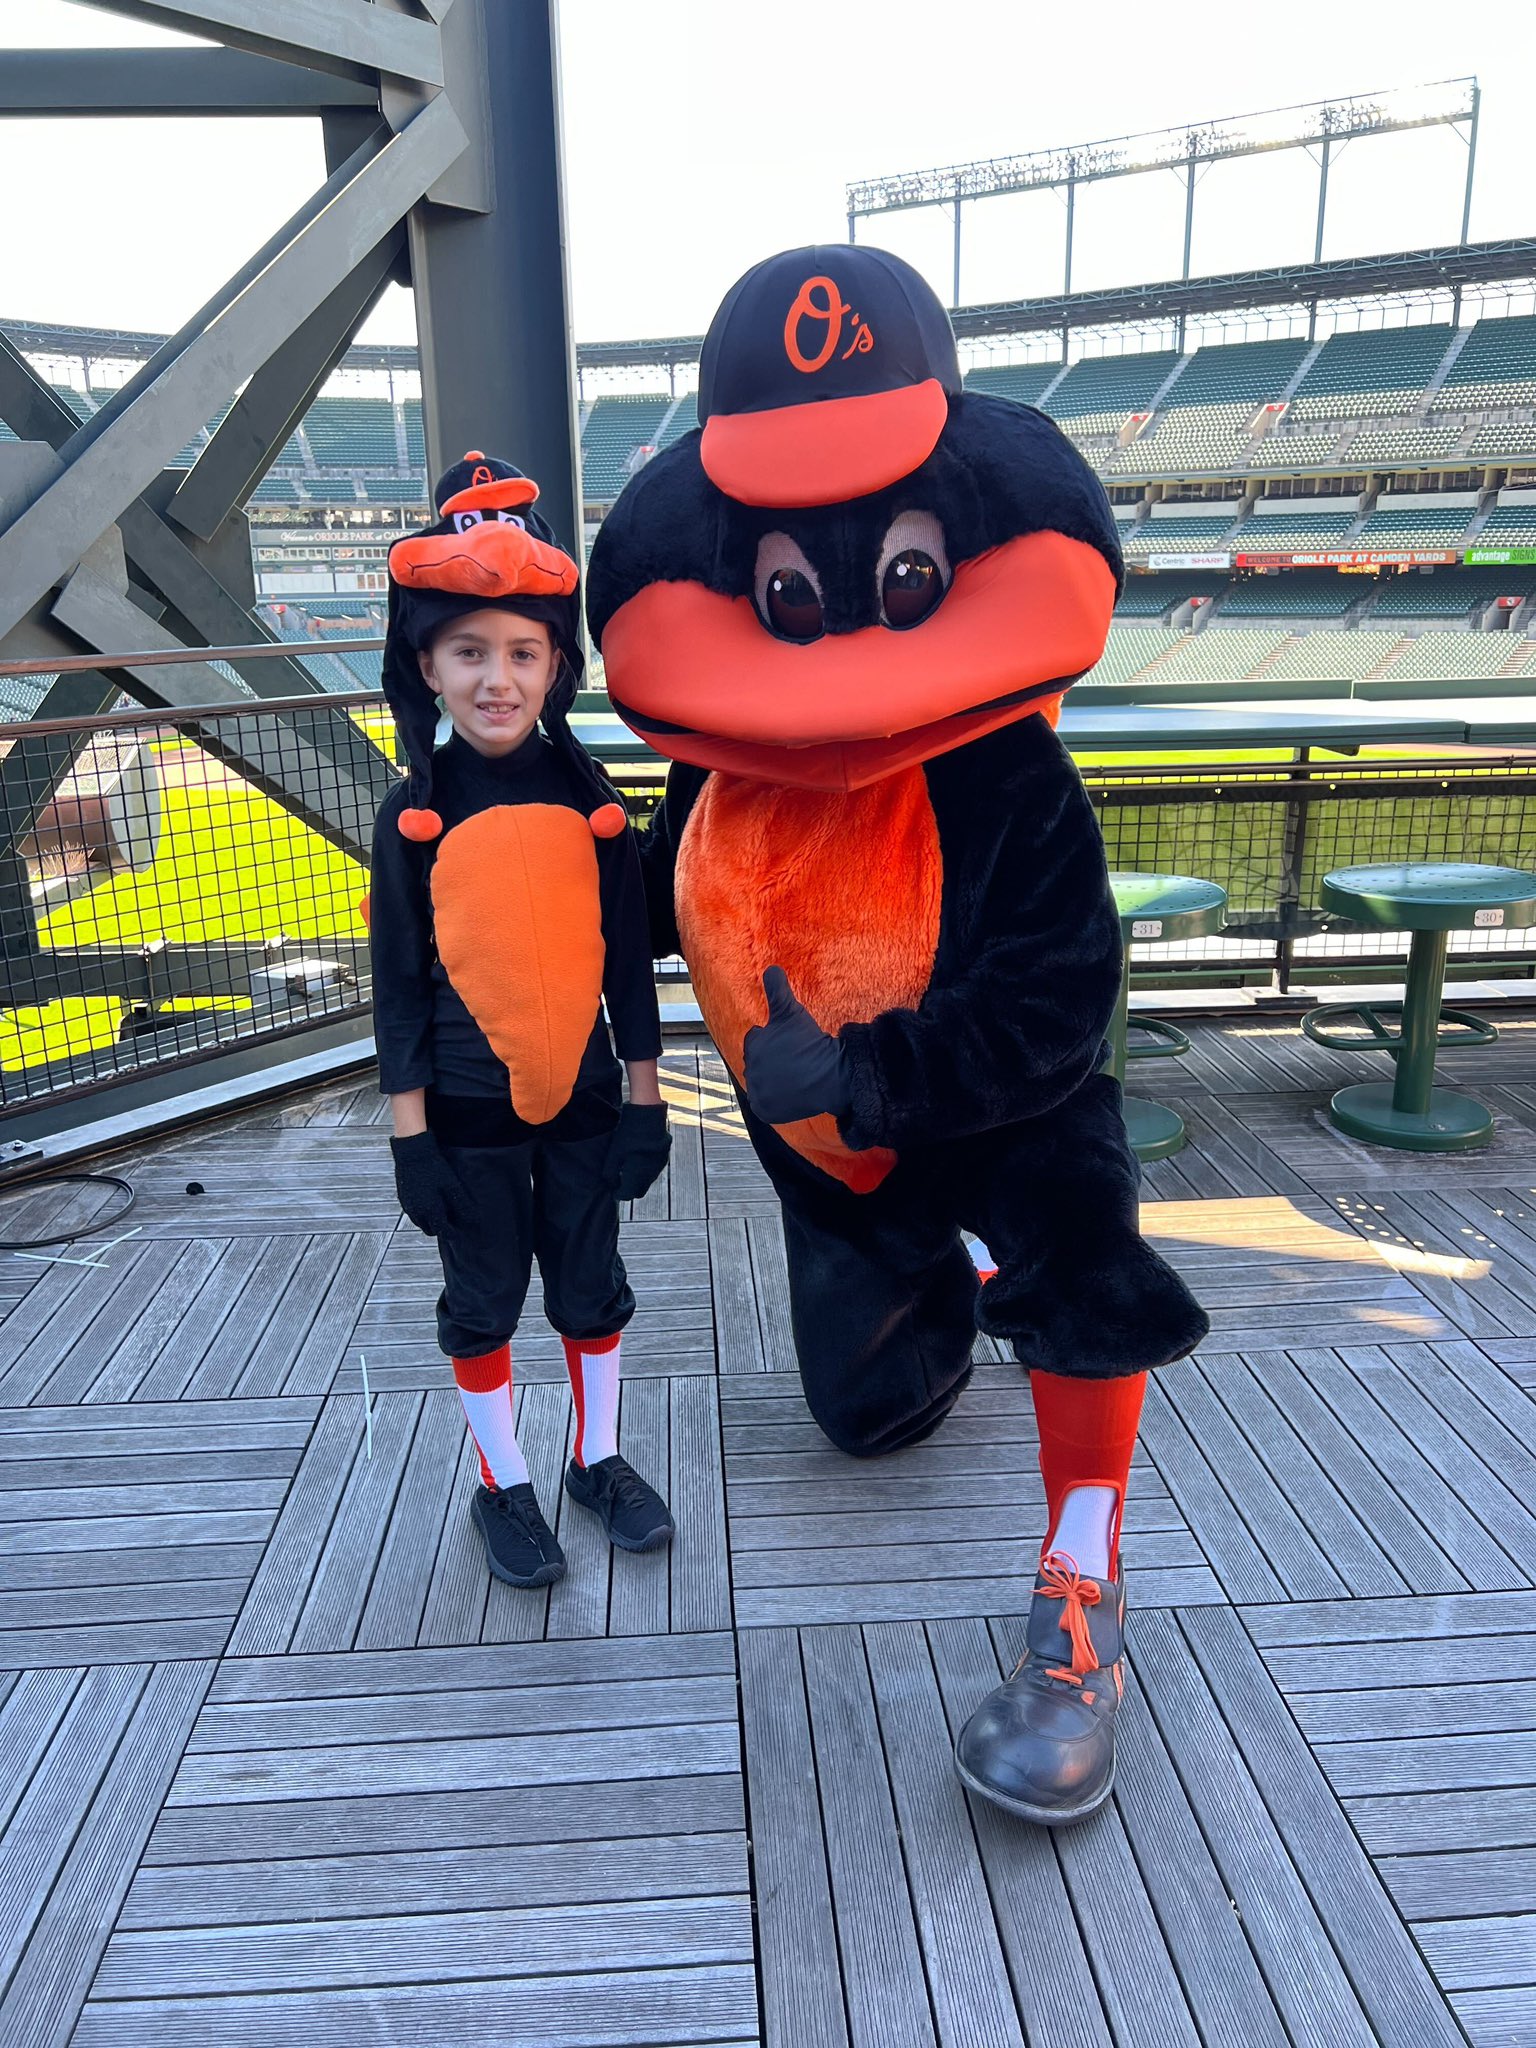 The Oriole Bird on X: Did we just become best friends?!